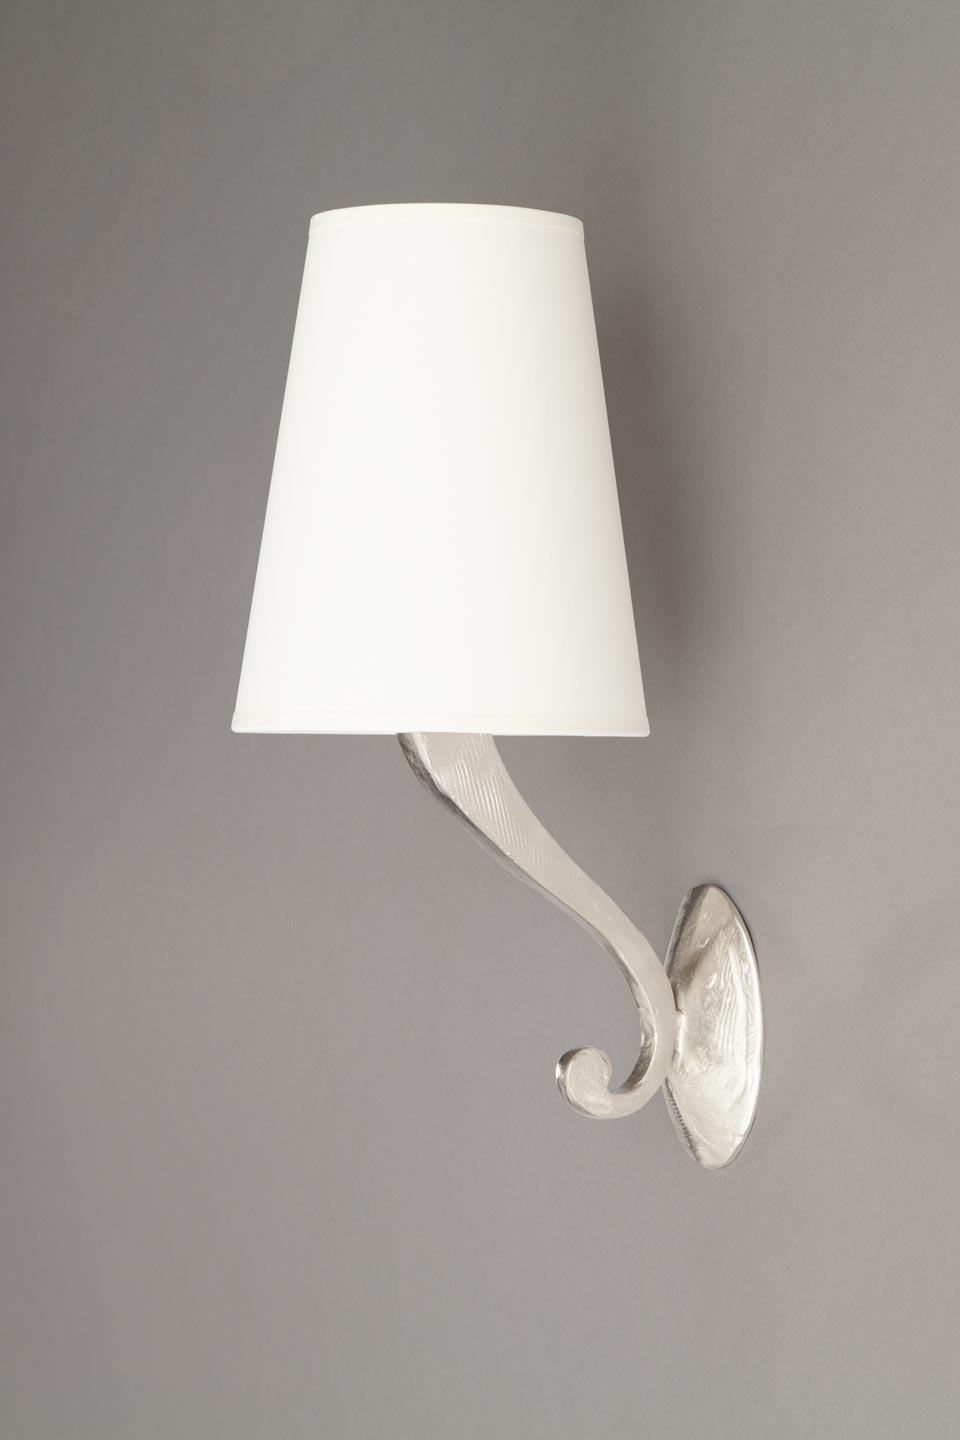 Linda classic wall lamp in silvered bronze. Objet insolite. 